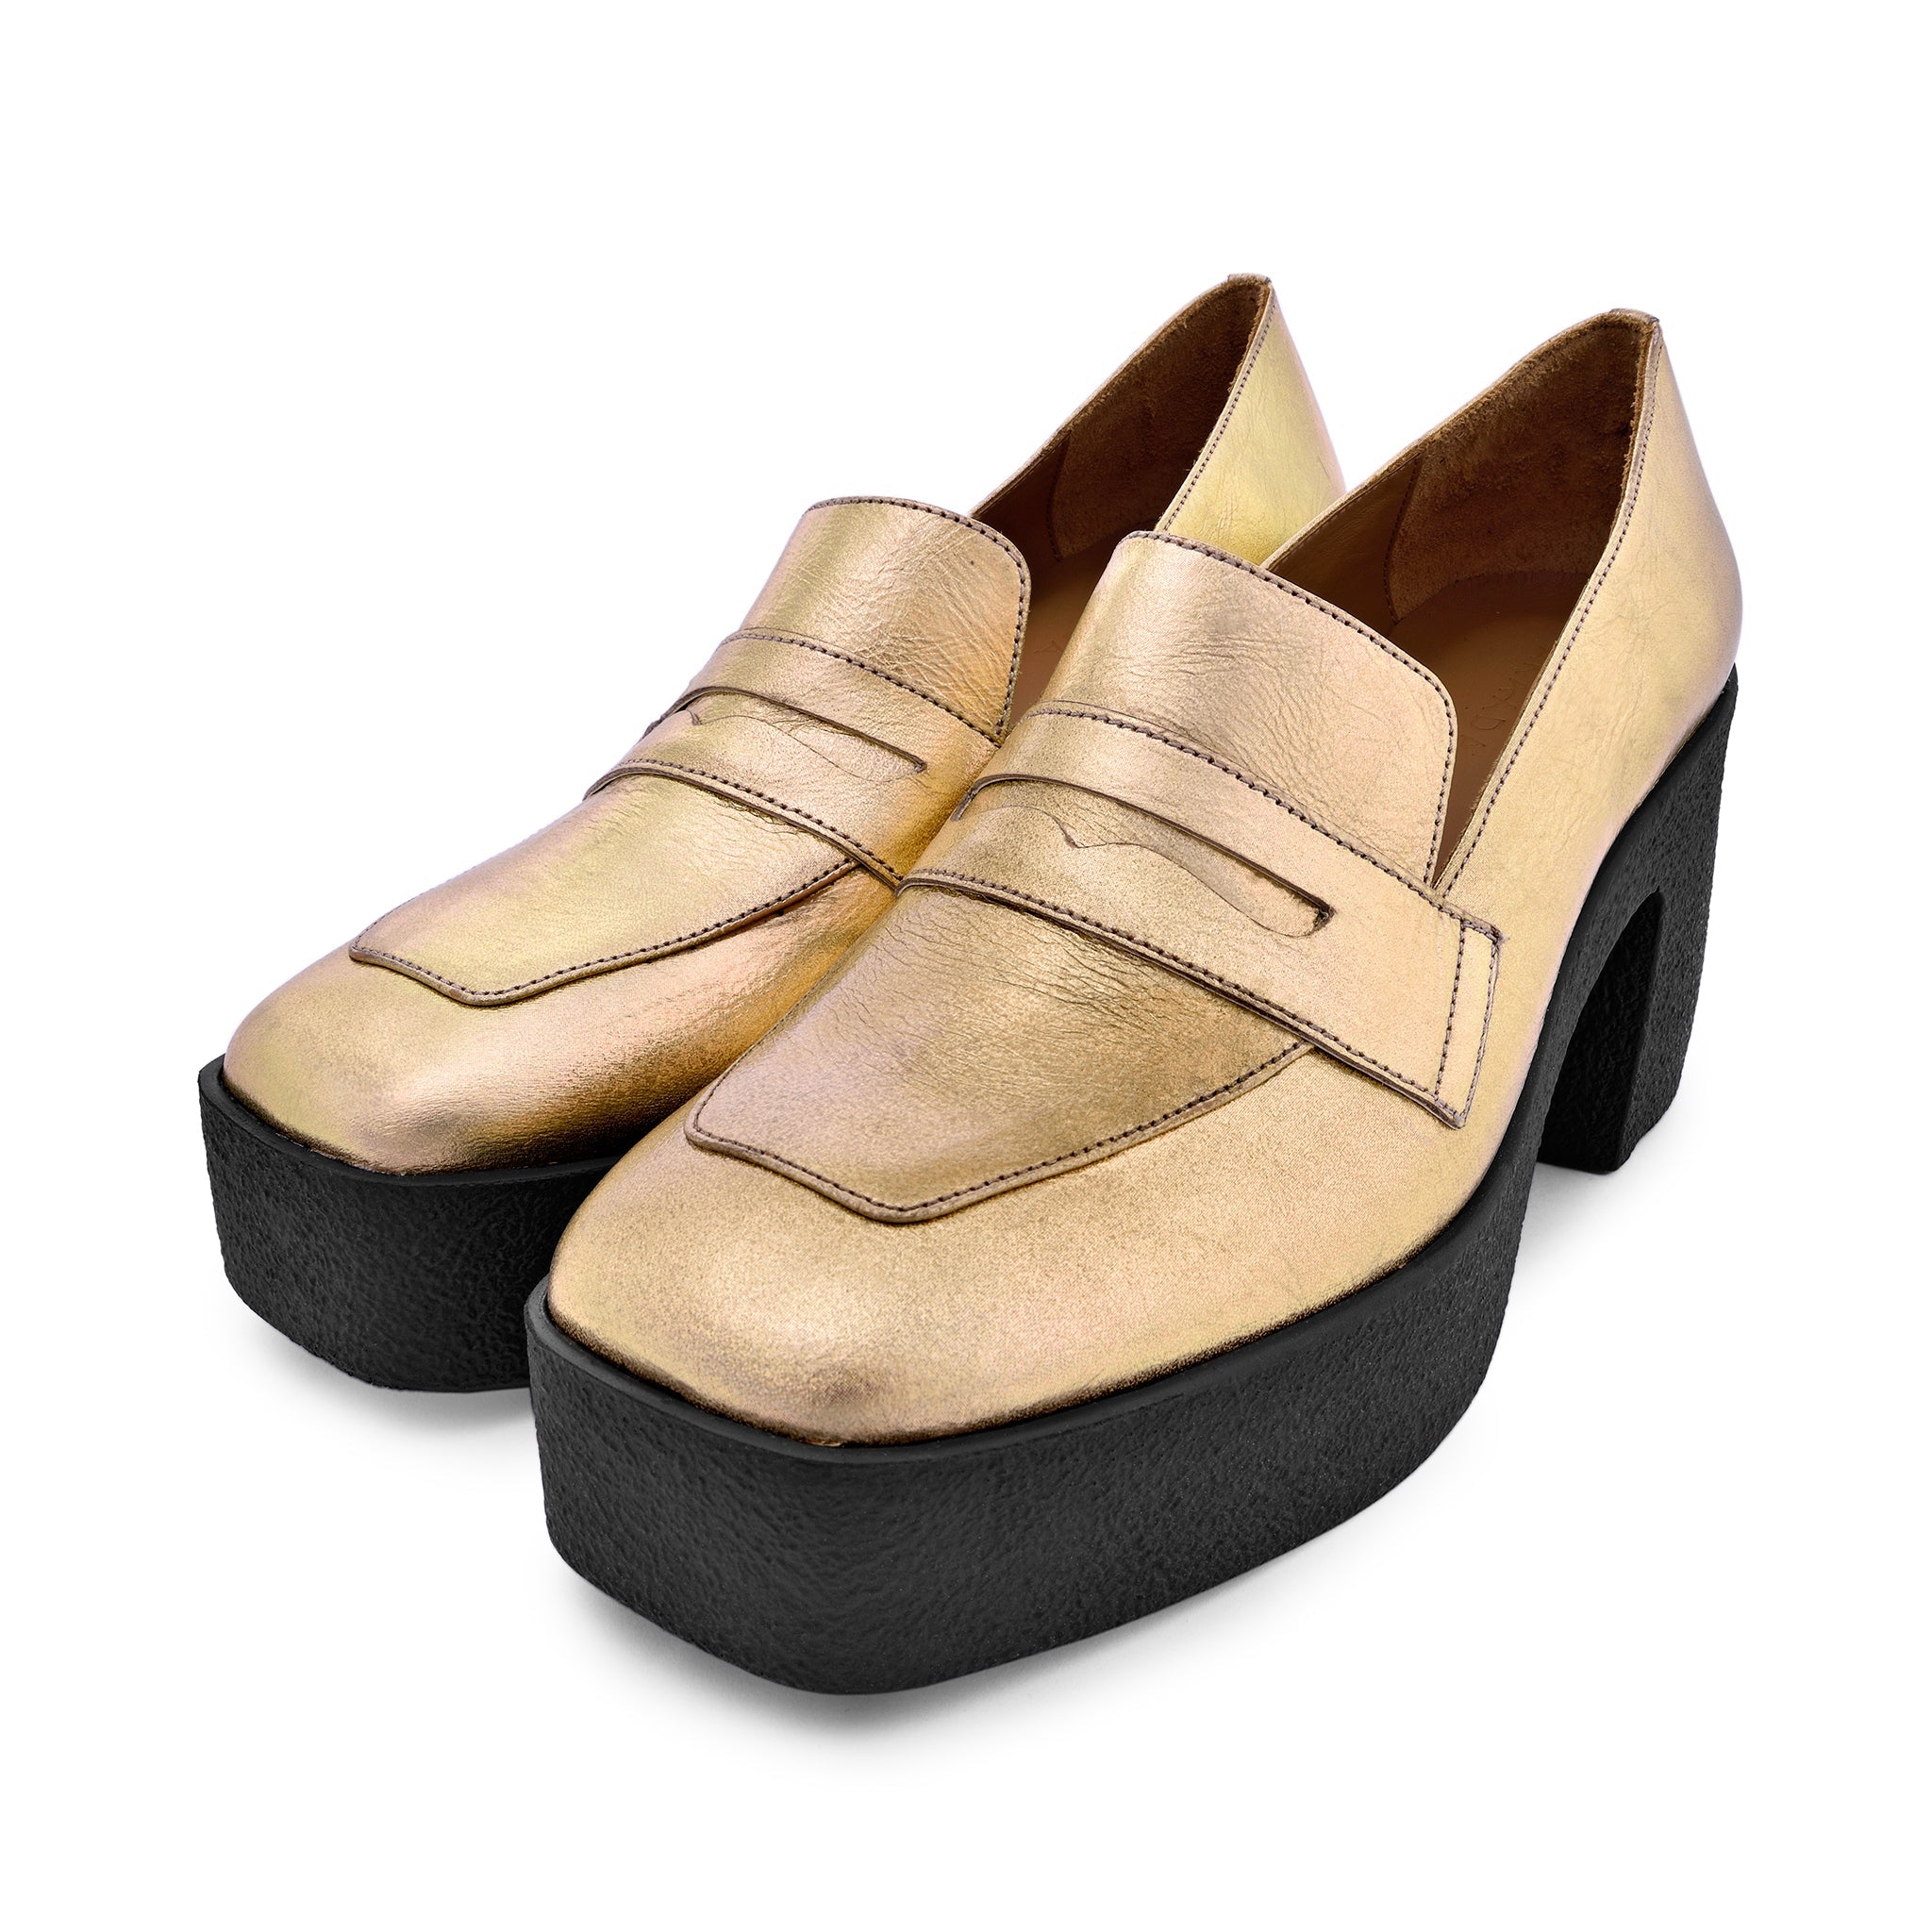 Yoko Gold Patent Leather Chunky Loafers 21031-01-11 - 5